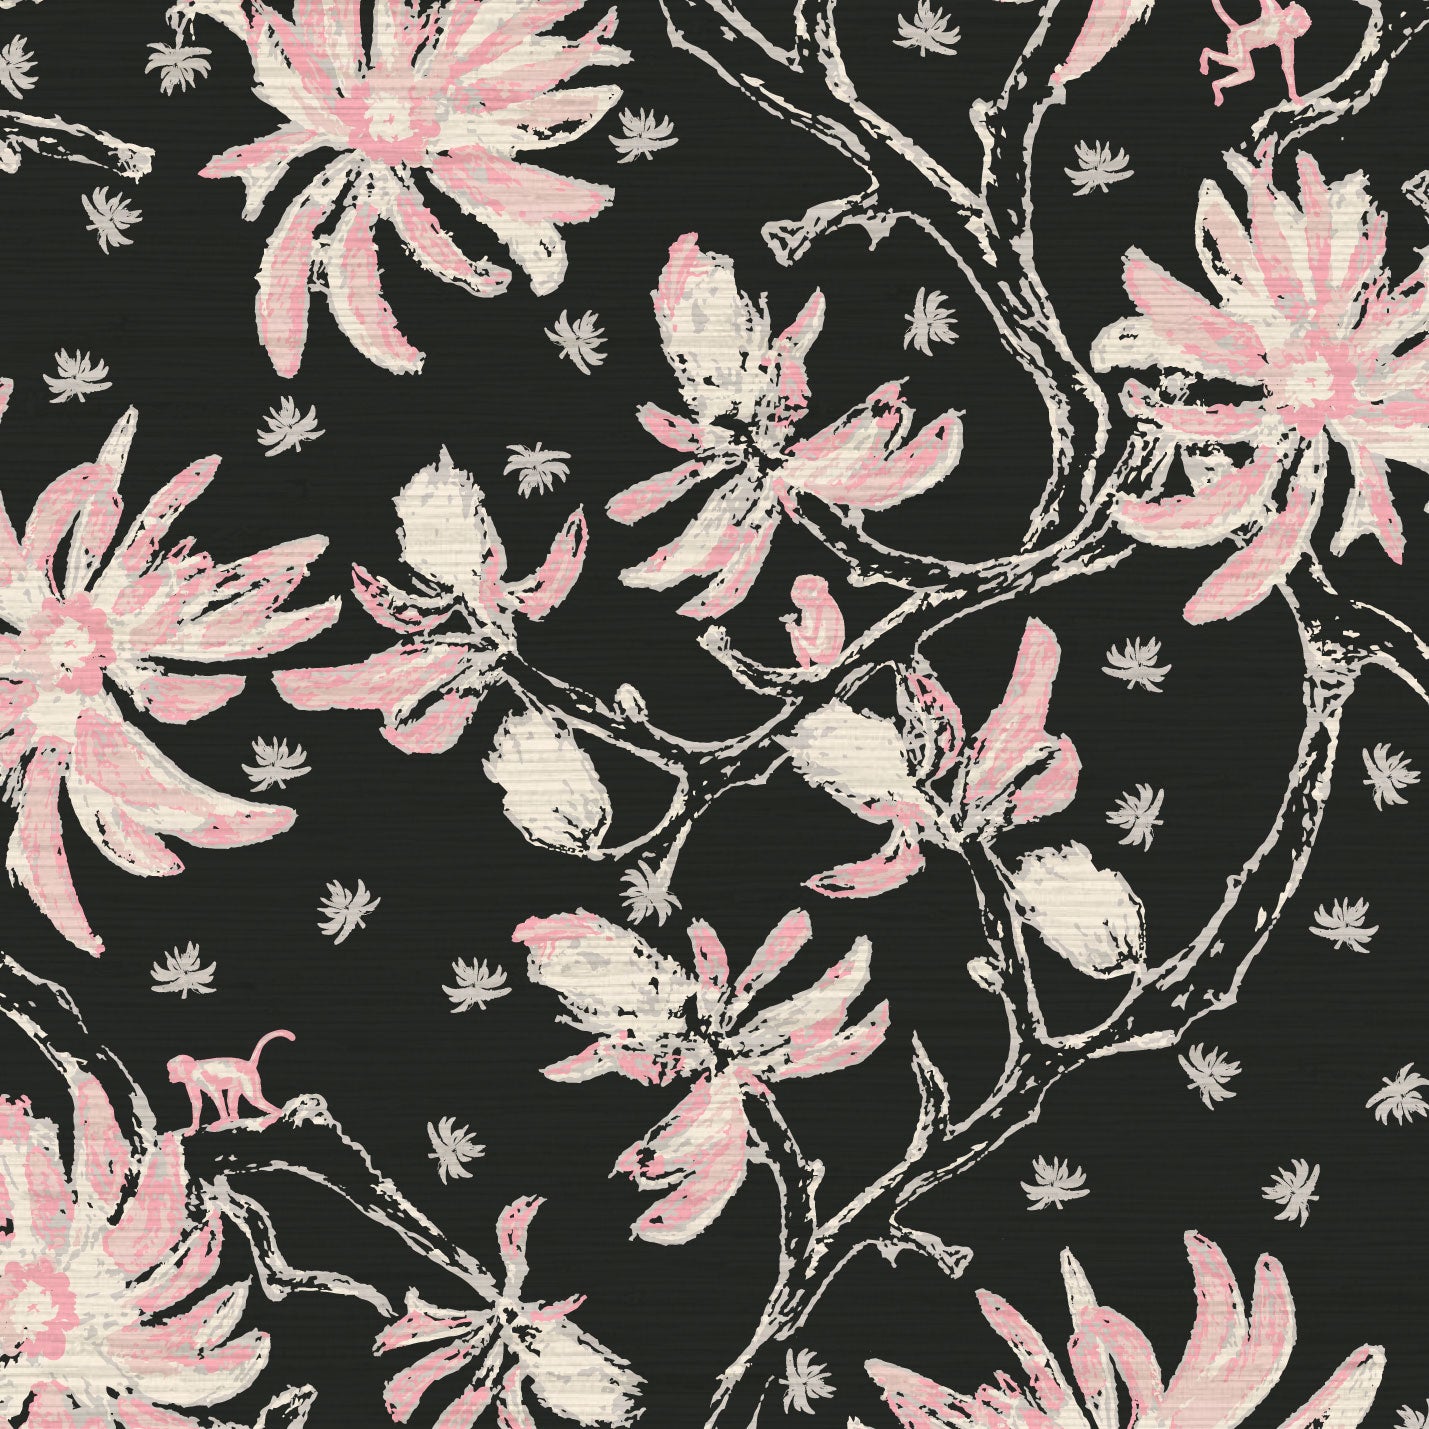 black pink pale pink pink flowers Natural Textured Eco-Friendly Non-toxic High-quality Sustainable practices Sustainability Wall covering Wallcovering Wallpaper Luxury Contemporary Designer Custom interior Bespoke Tailor-made Nature inspired Bold Garden Wallpaper Chinoiserie Asian inspired chinz tree branches flowers flower floral garden monkey animal chinese asian inspired